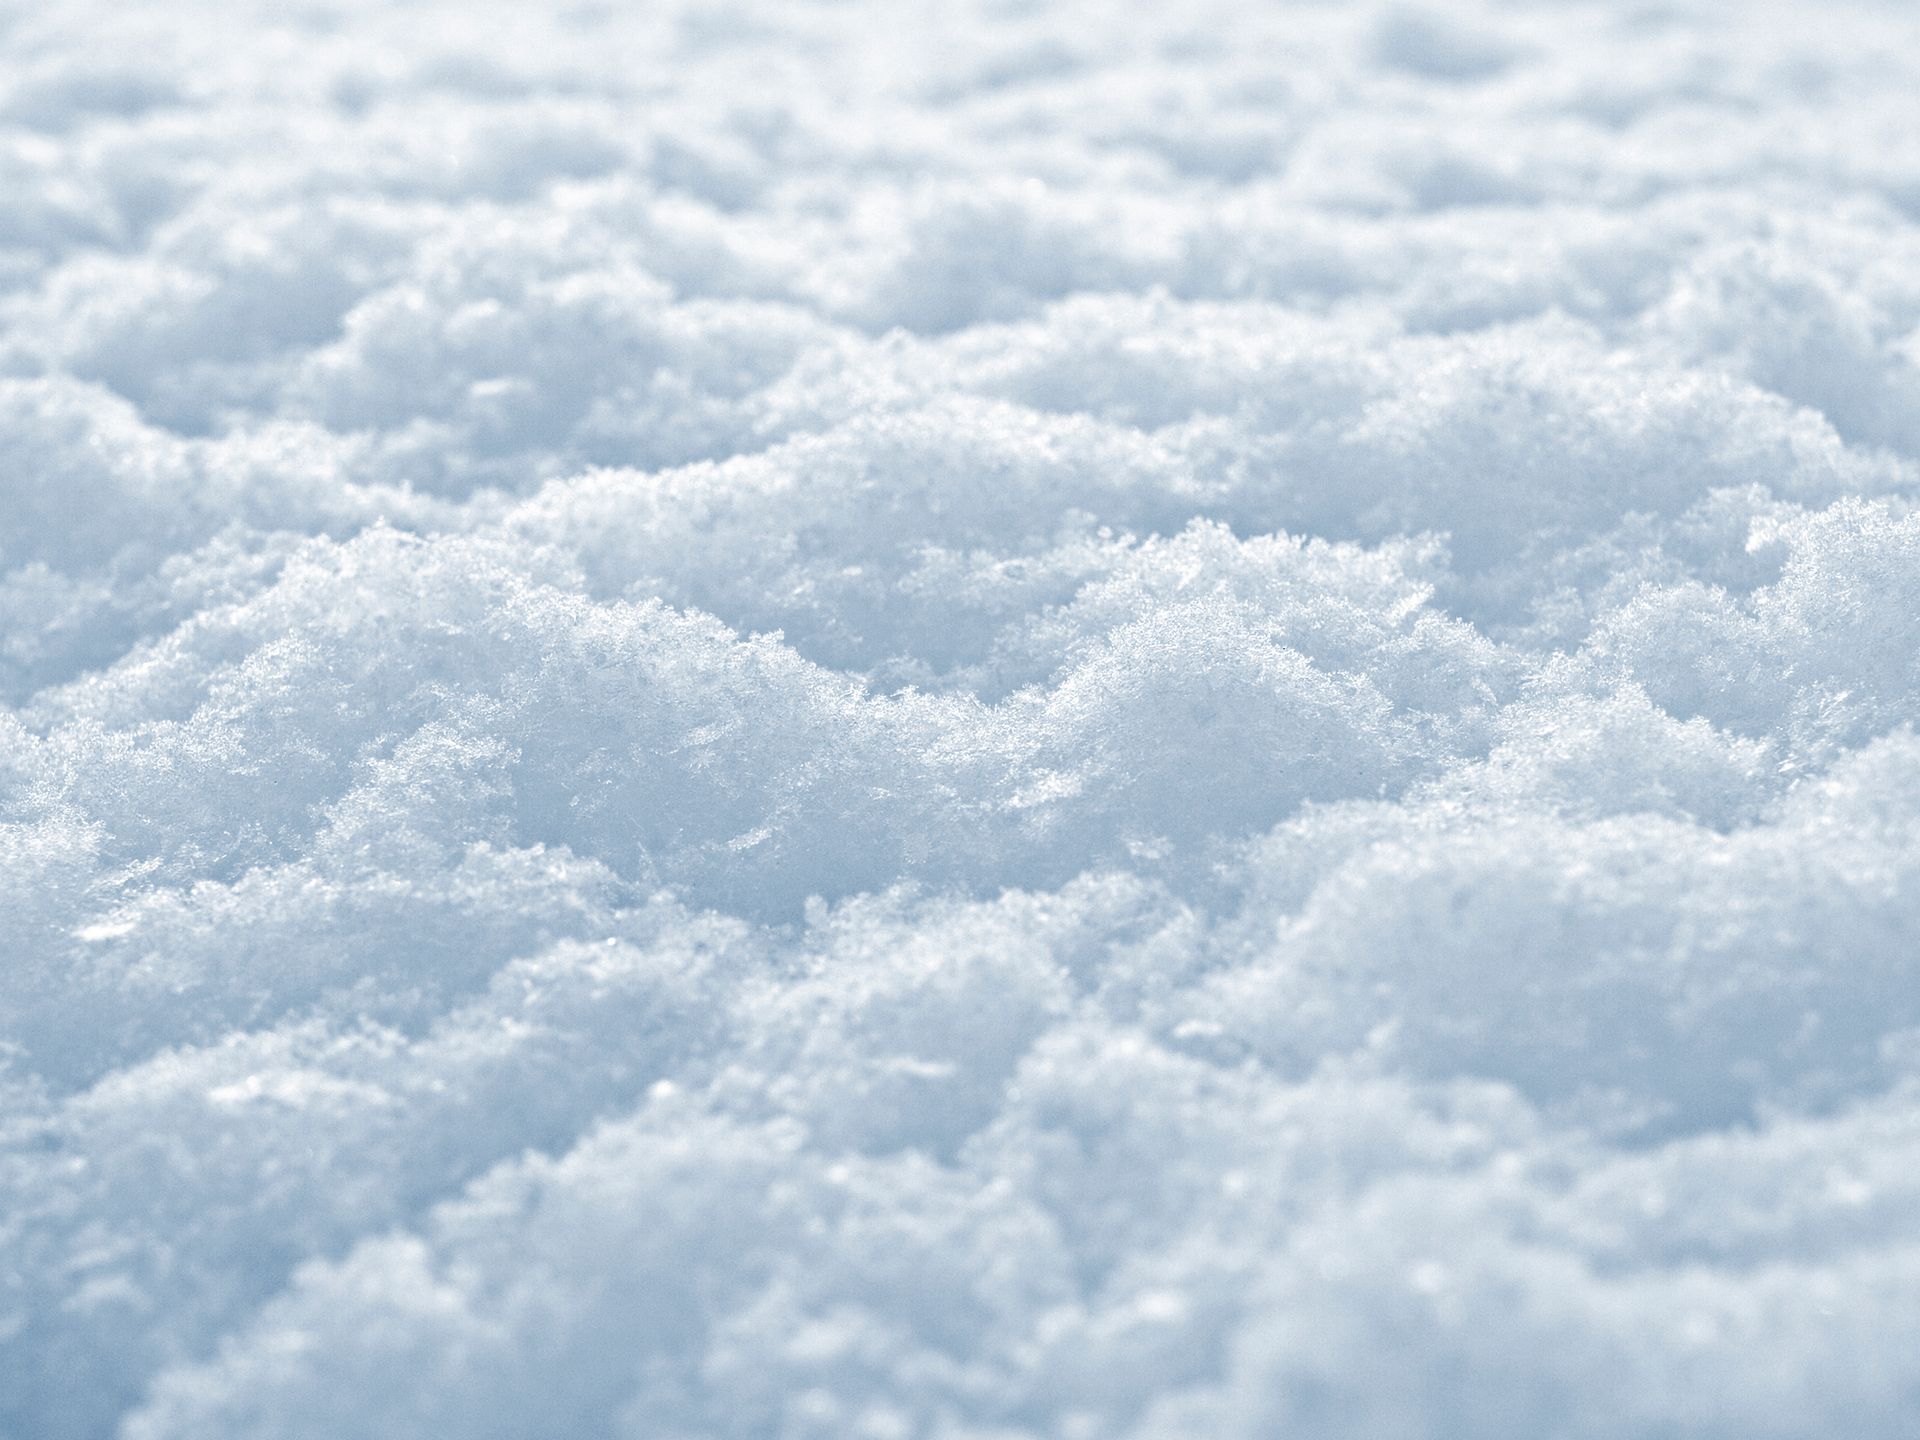 a close up of a pile of snow that looks like clouds .